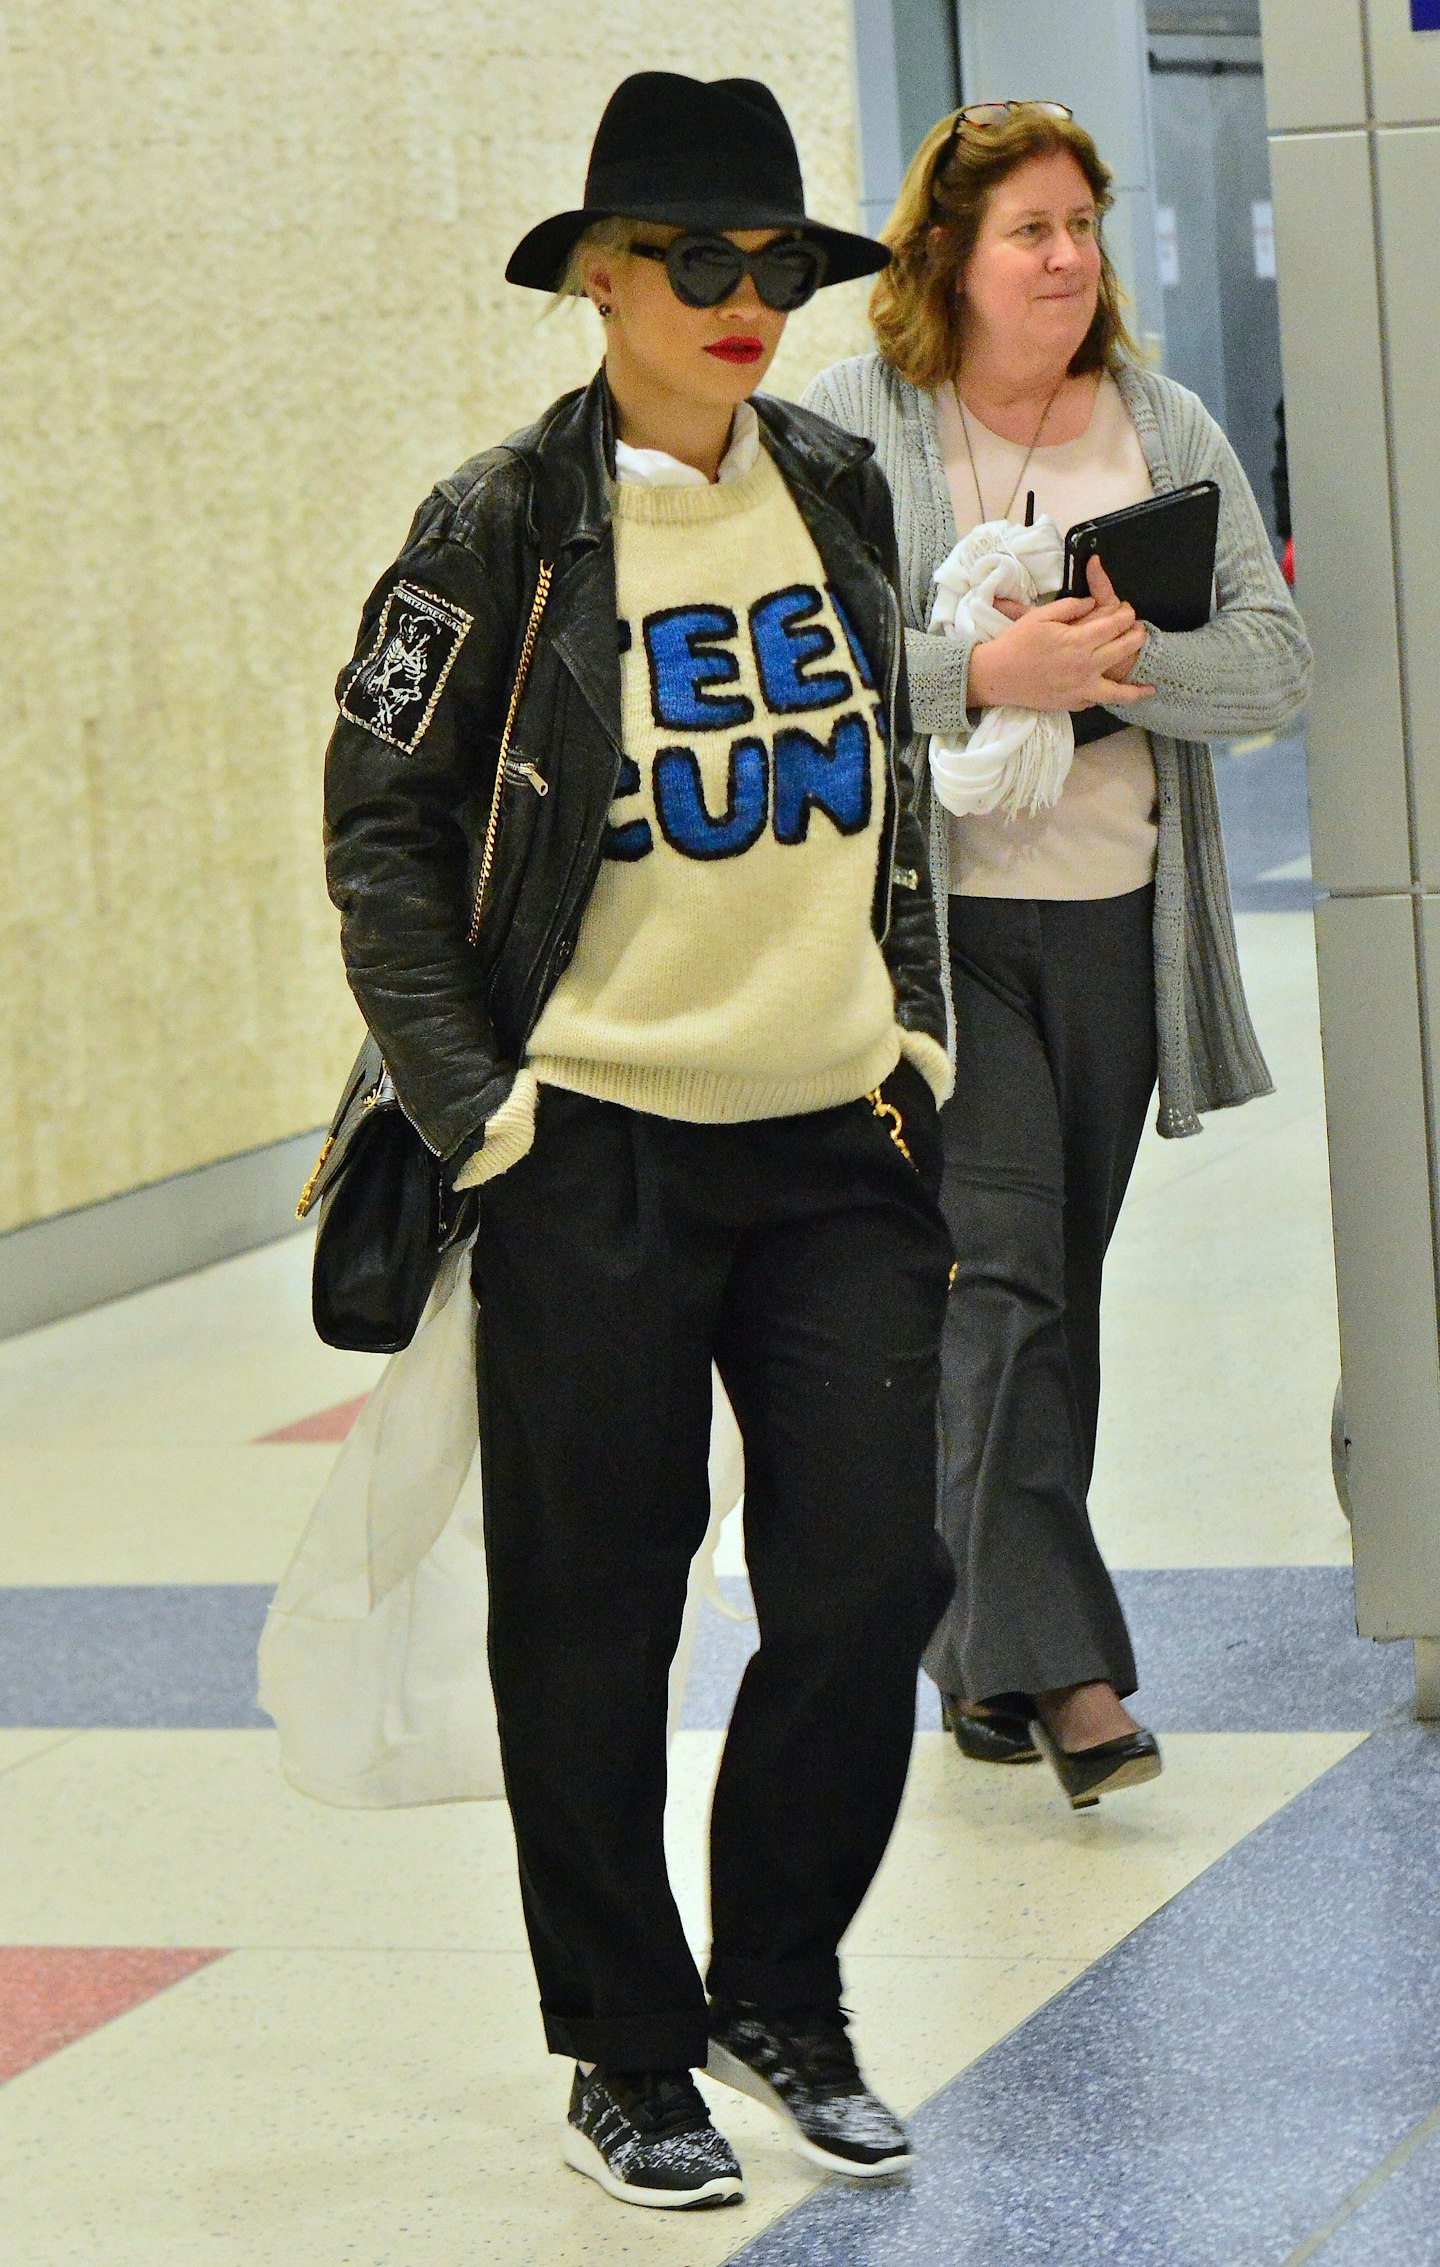 Travelling in style as she touches down at JFK Airport in 2015.